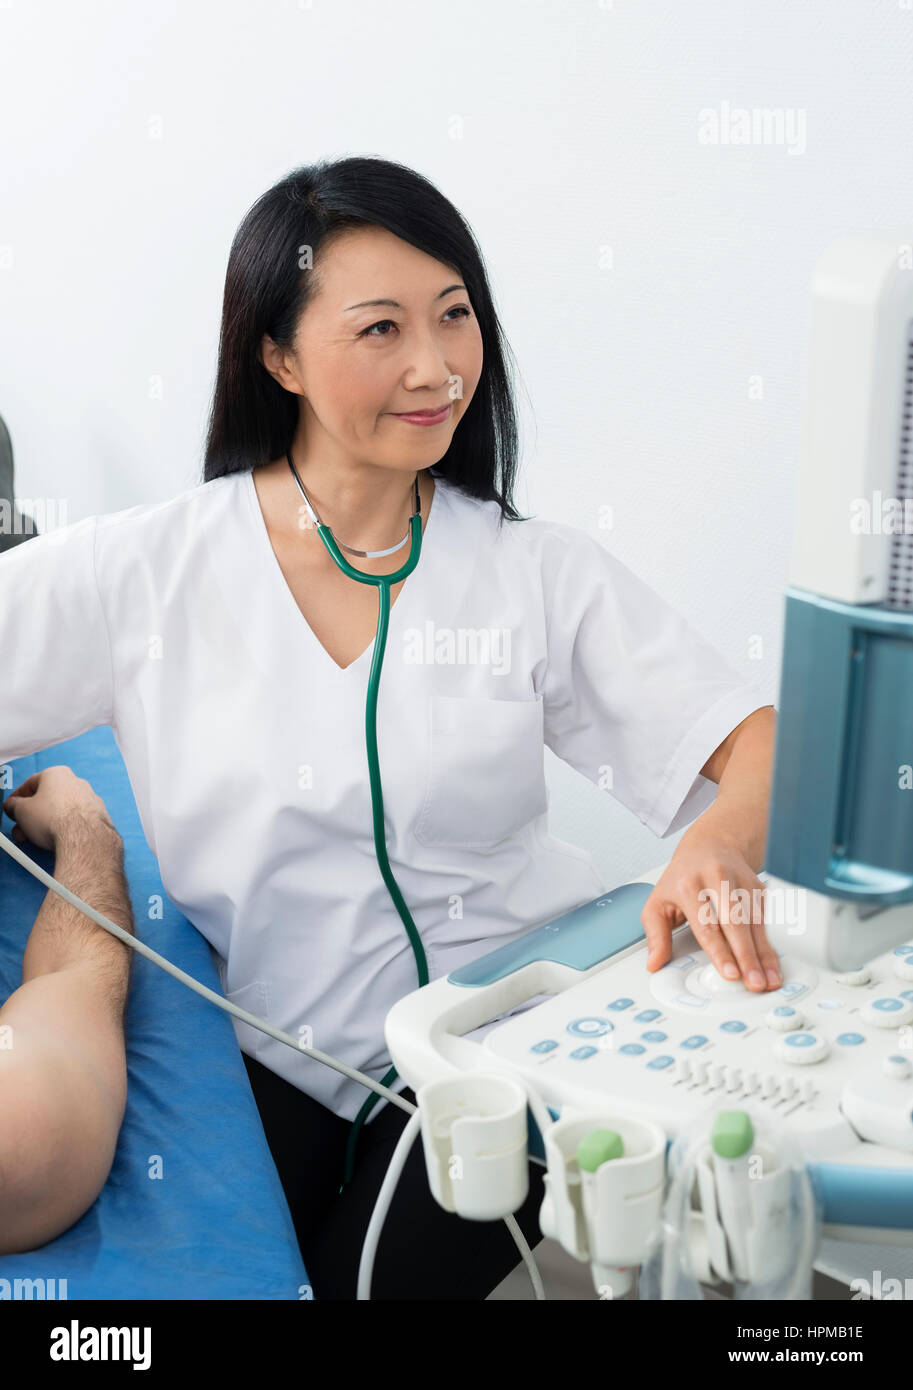 Smiling female doctor operating ultrasound machine while examining male patient in hospital Stock Photo